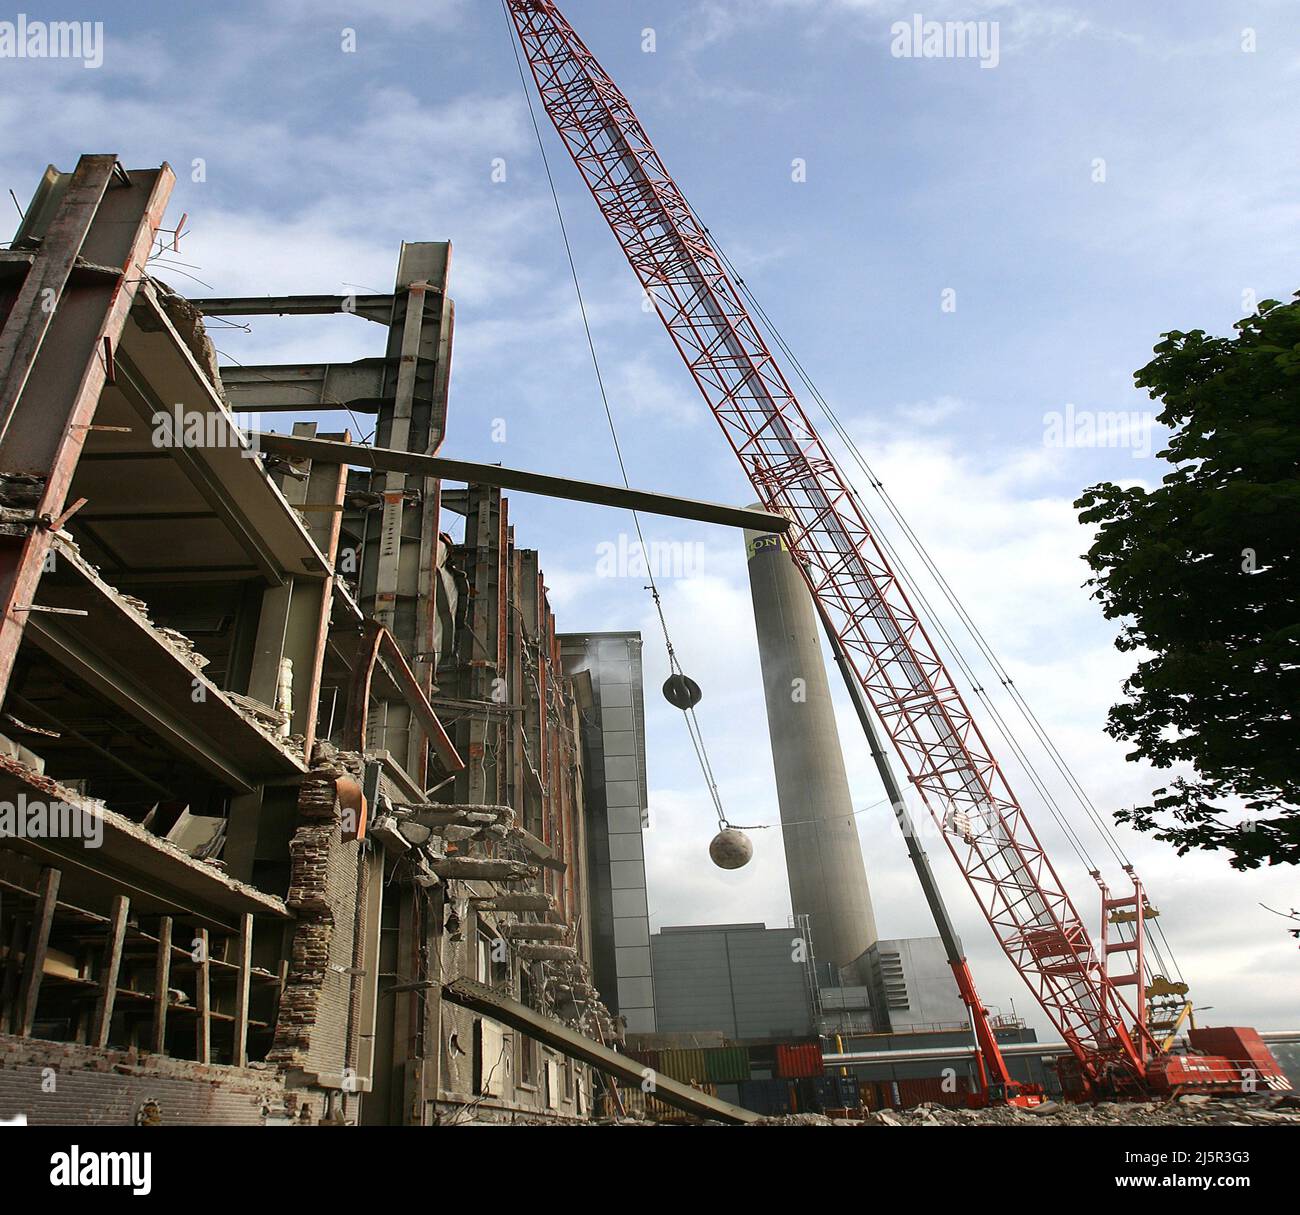 Netherlands, Utrecht - Building is demolished with a wrecking ball Stock Photo